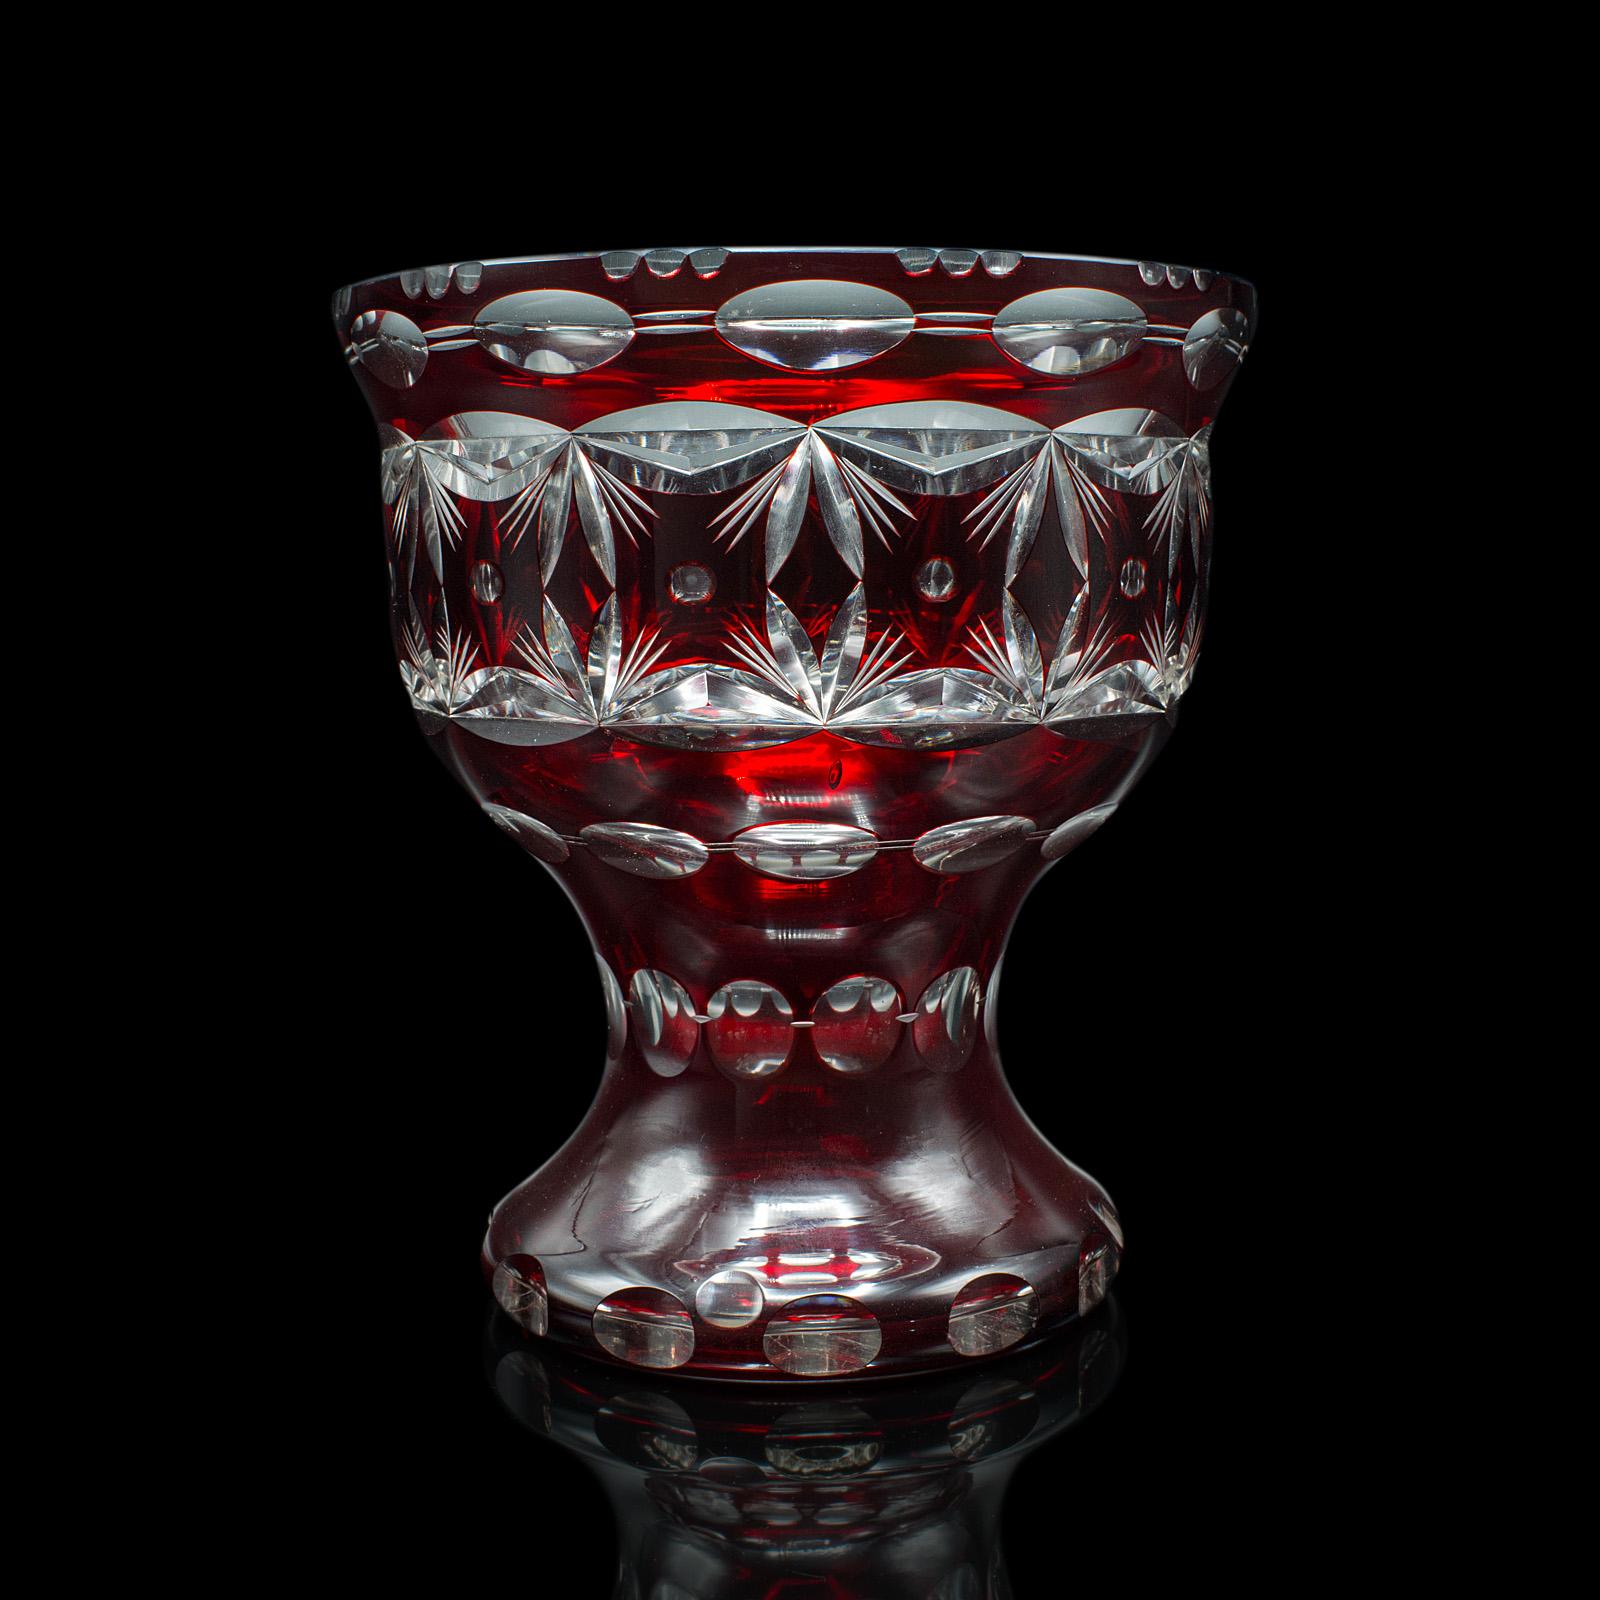 This is an antique pedestal bowl. A Continental, red glass decorative ice bucket, dating to the early 20th century, circa 1920.

Striking colour and detail, with a fascinating appearance
Displays a desirable aged patina and in good original